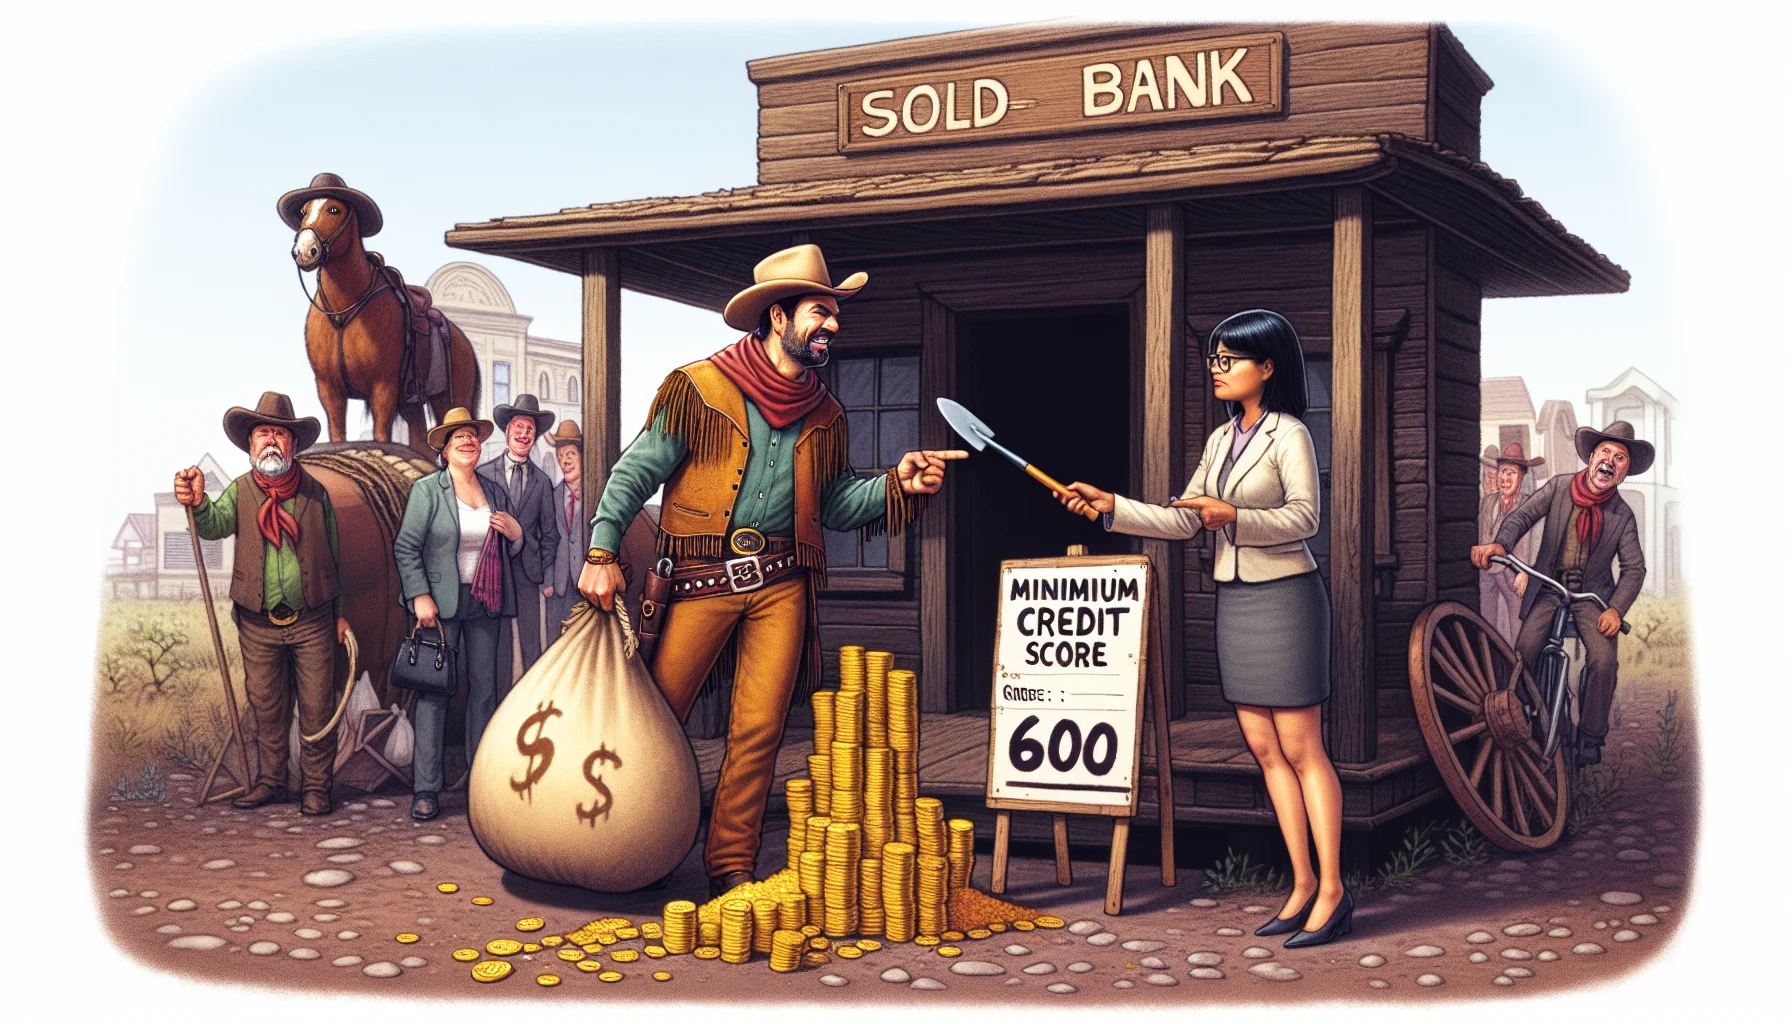 Imagine a humorous scene of a bank in the old Wild West. A cowboy, whom we'll say is of Hispanic descent, walks in with an enormous bag of gold coins and a shovel, expressing his intention to buy a house. The stern-faced, female South Asian banker, in disbelief, shows him a wooden placard written 'Minimum Credit Score: 600'. People around are giggling. The cowboy, clueless, pulls out a piece of parchment showing a hand-drawn 'credit score' of 500. The scene is full of humorous exaggerations that visualize the concept of trying to buy a home with a low credit score in a lighthearted way.